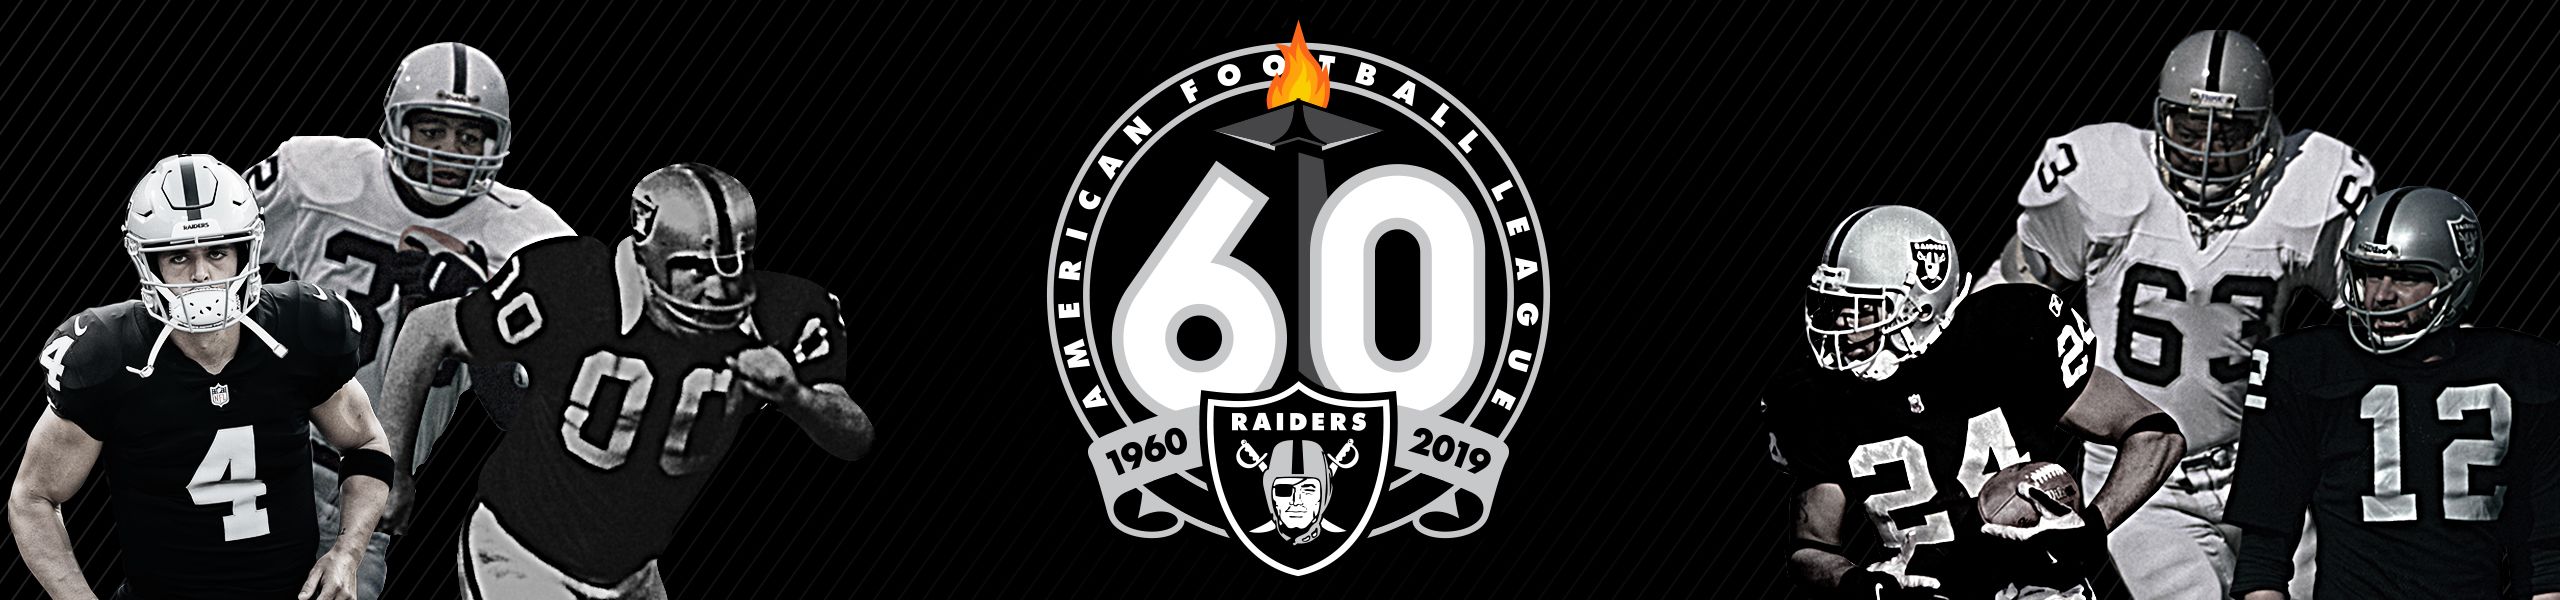 raiders 60th anniversary patch jersey